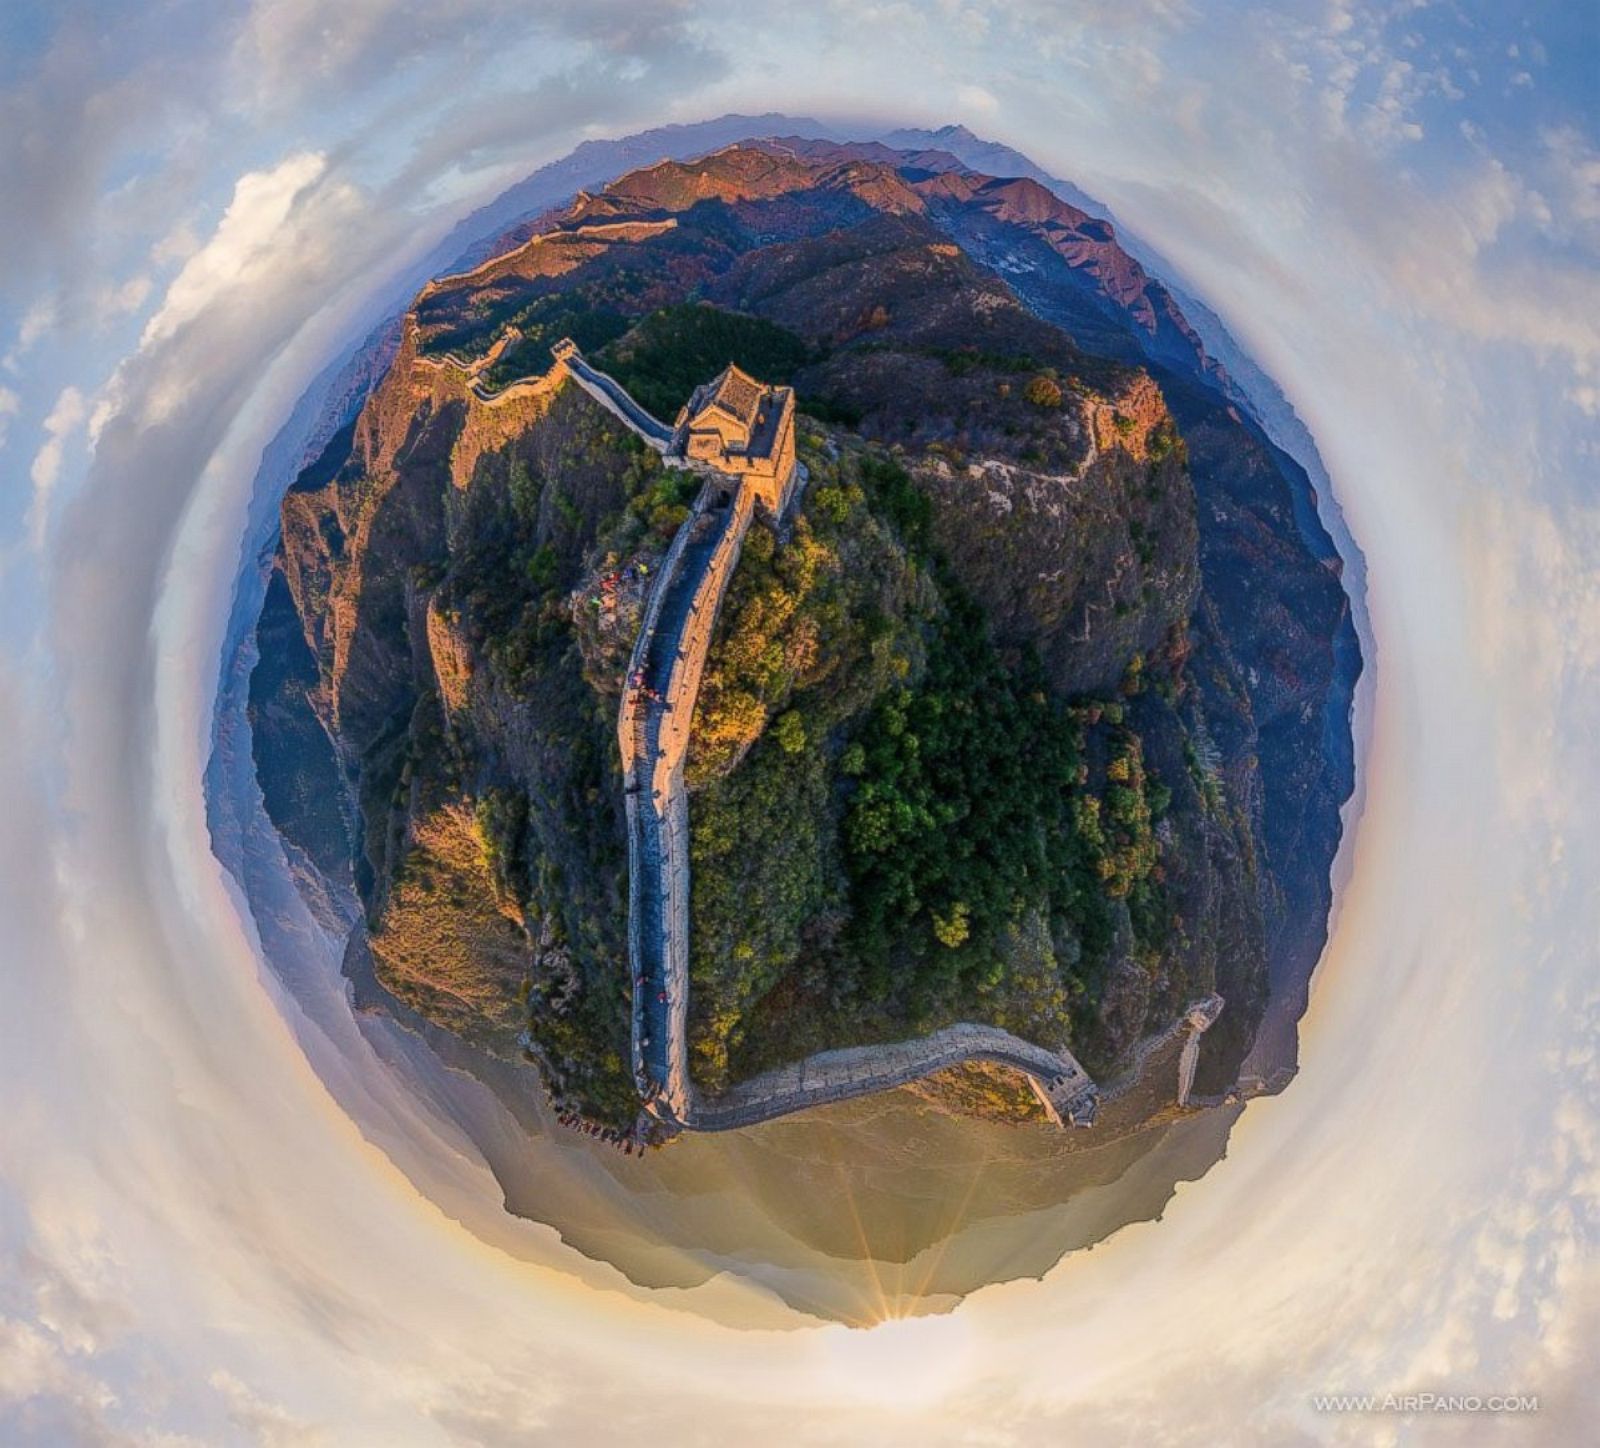 Turned earth. Стена земли. Китайская стена 360. Китайская стена панорама. AIRPANO.